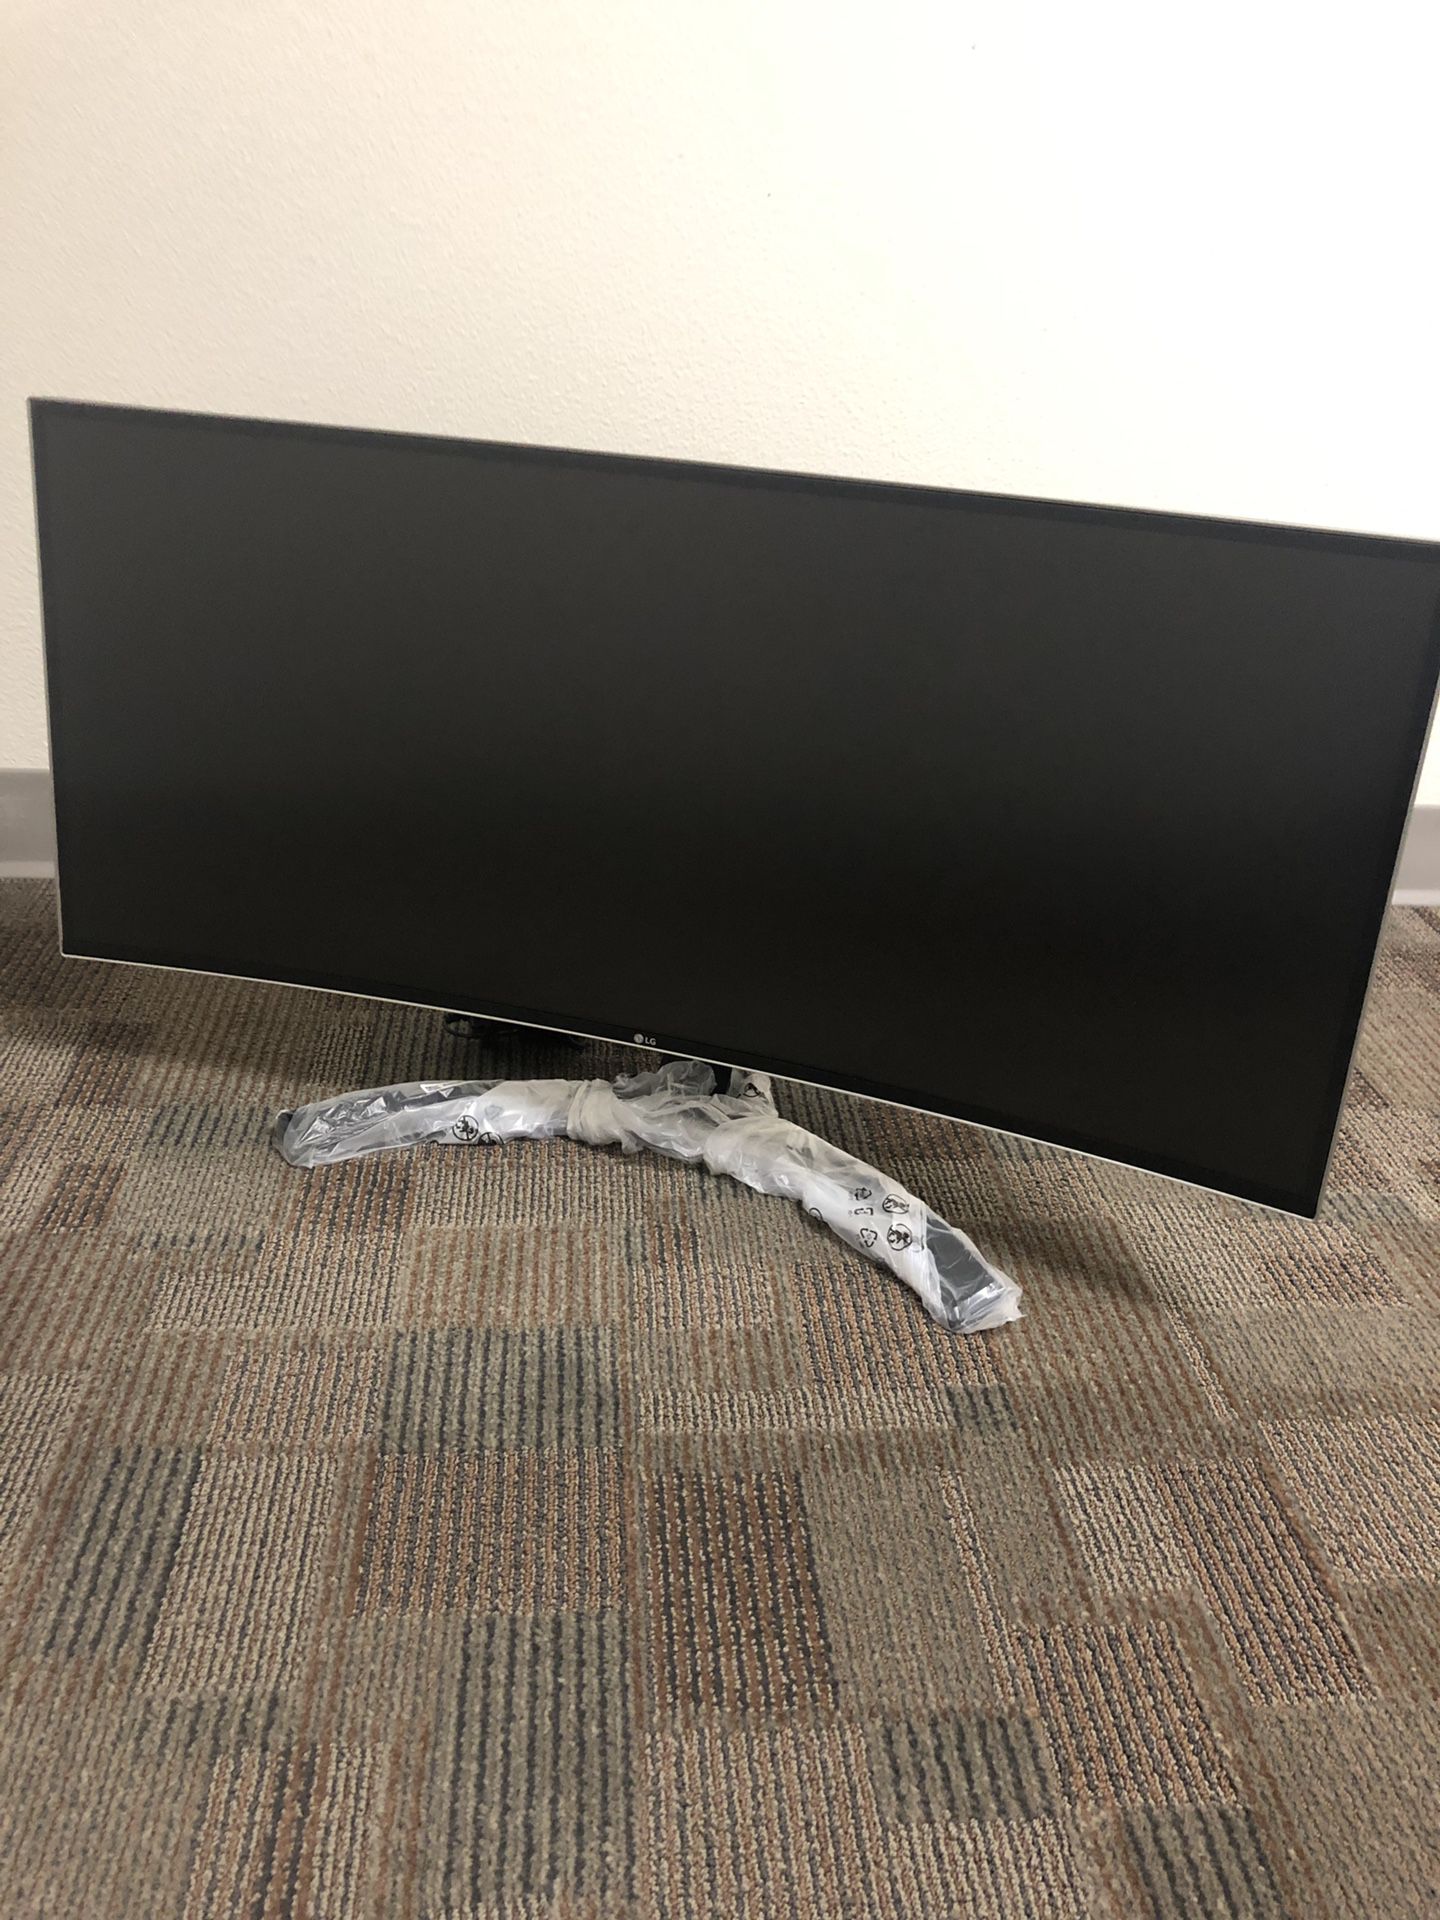 LG Monitor 34” Ultra-wide curved LED monitor